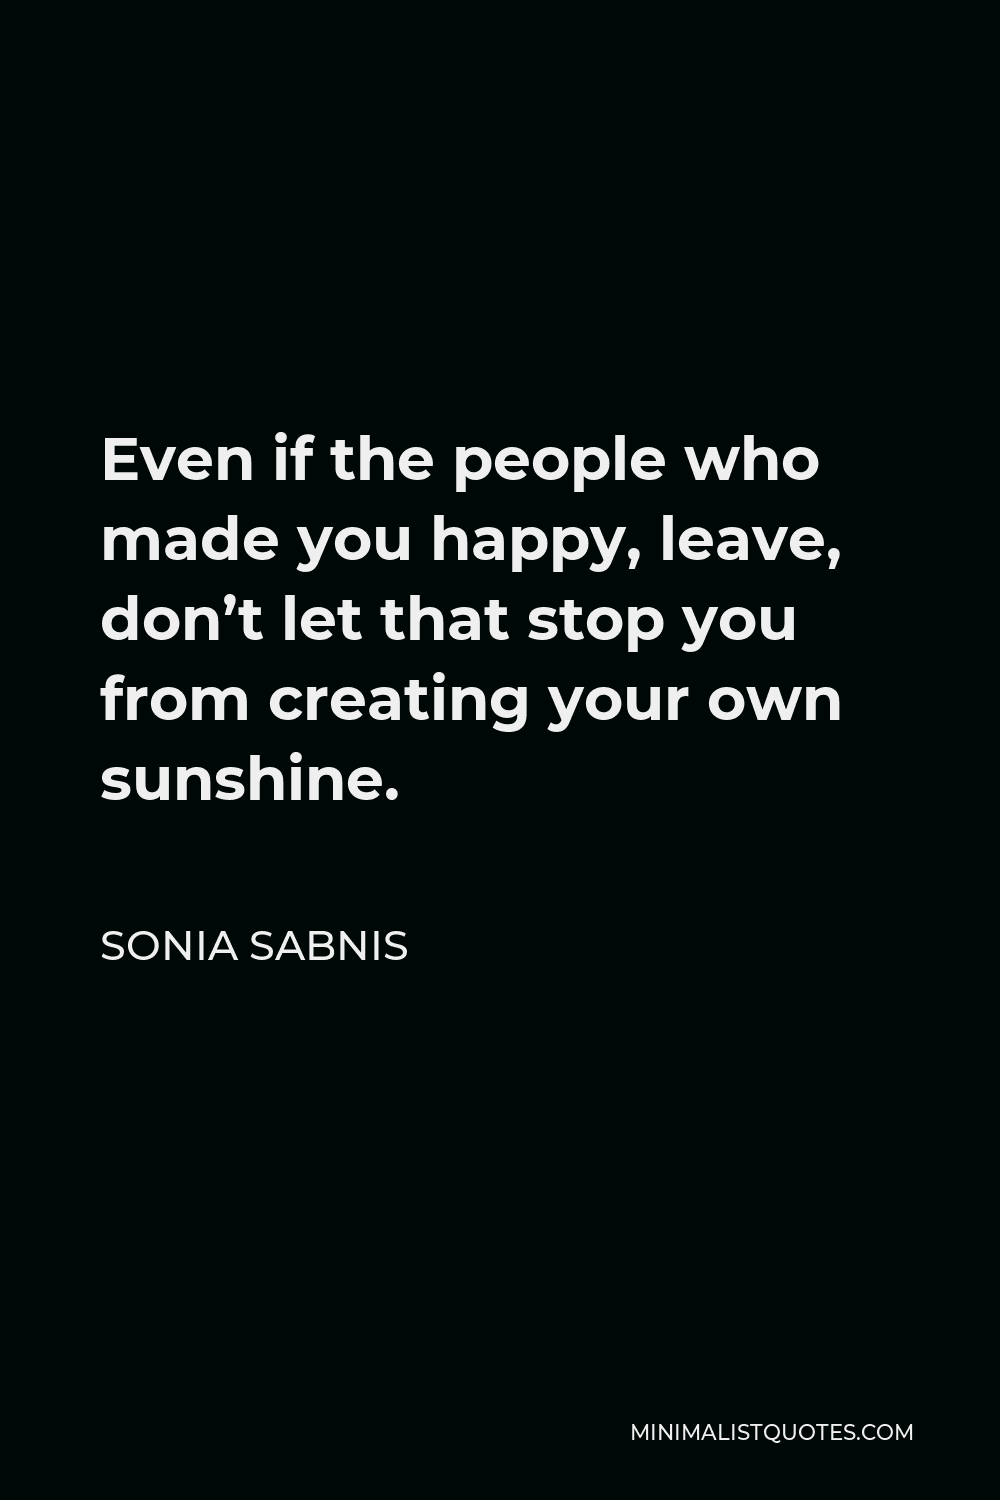 Sonia Sabnis Quote - Even if the people who made you happy, leave, don’t let that stop you from creating your own sunshine.